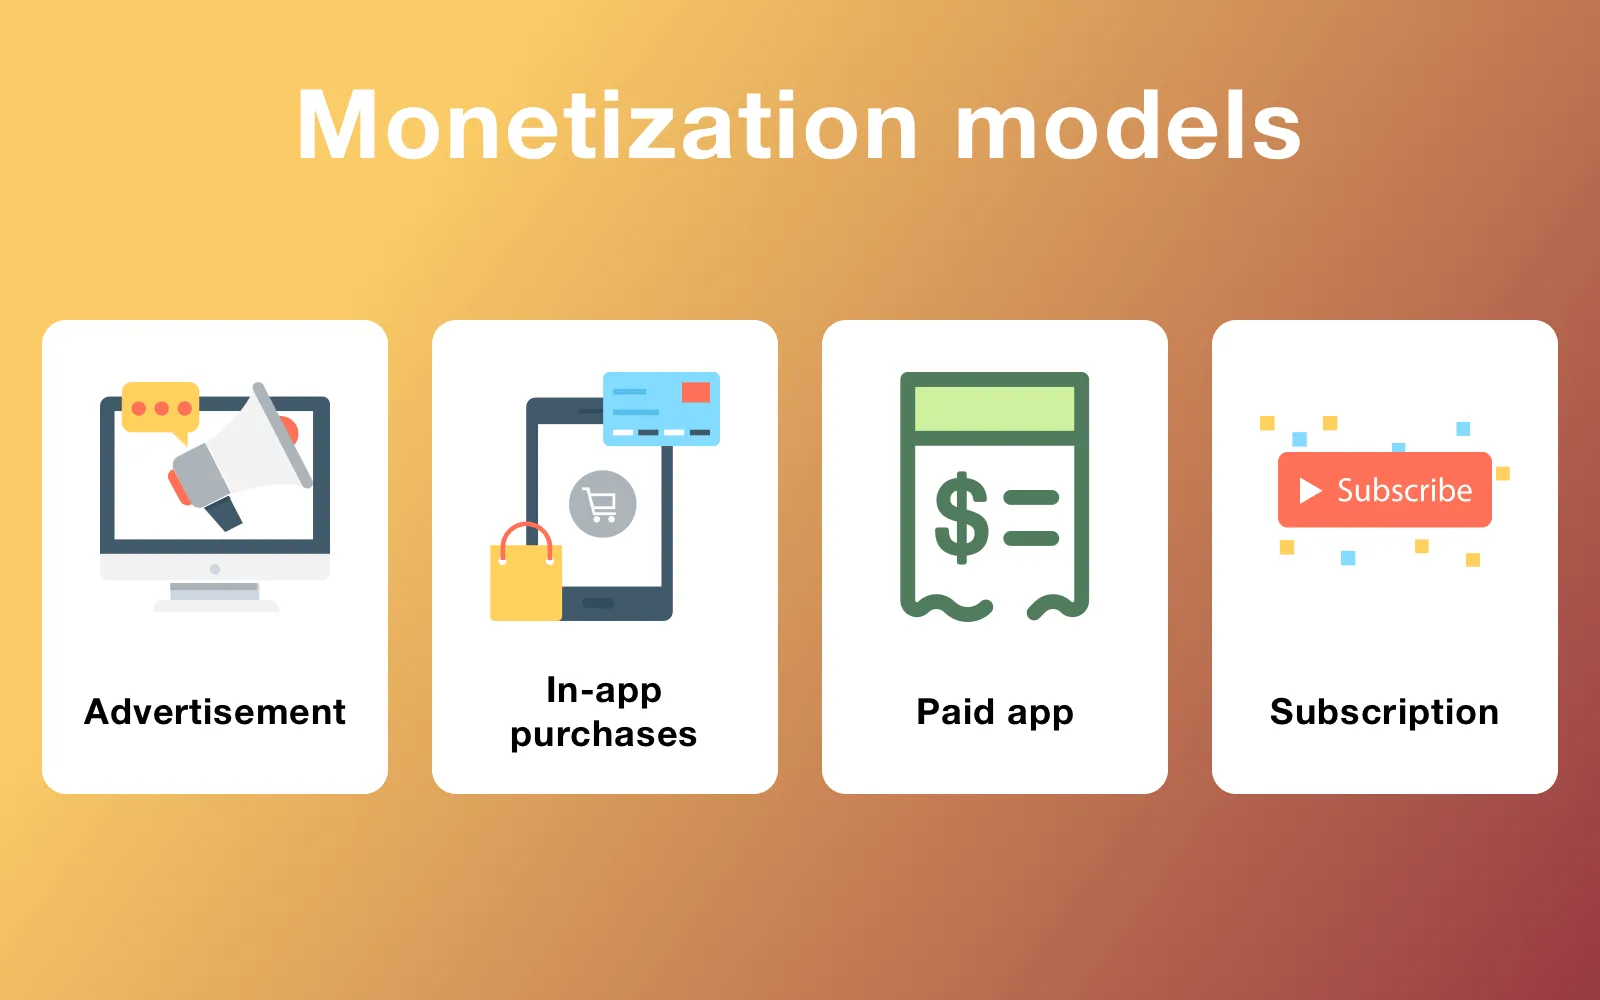 Monetization models that are popular for messaging apps